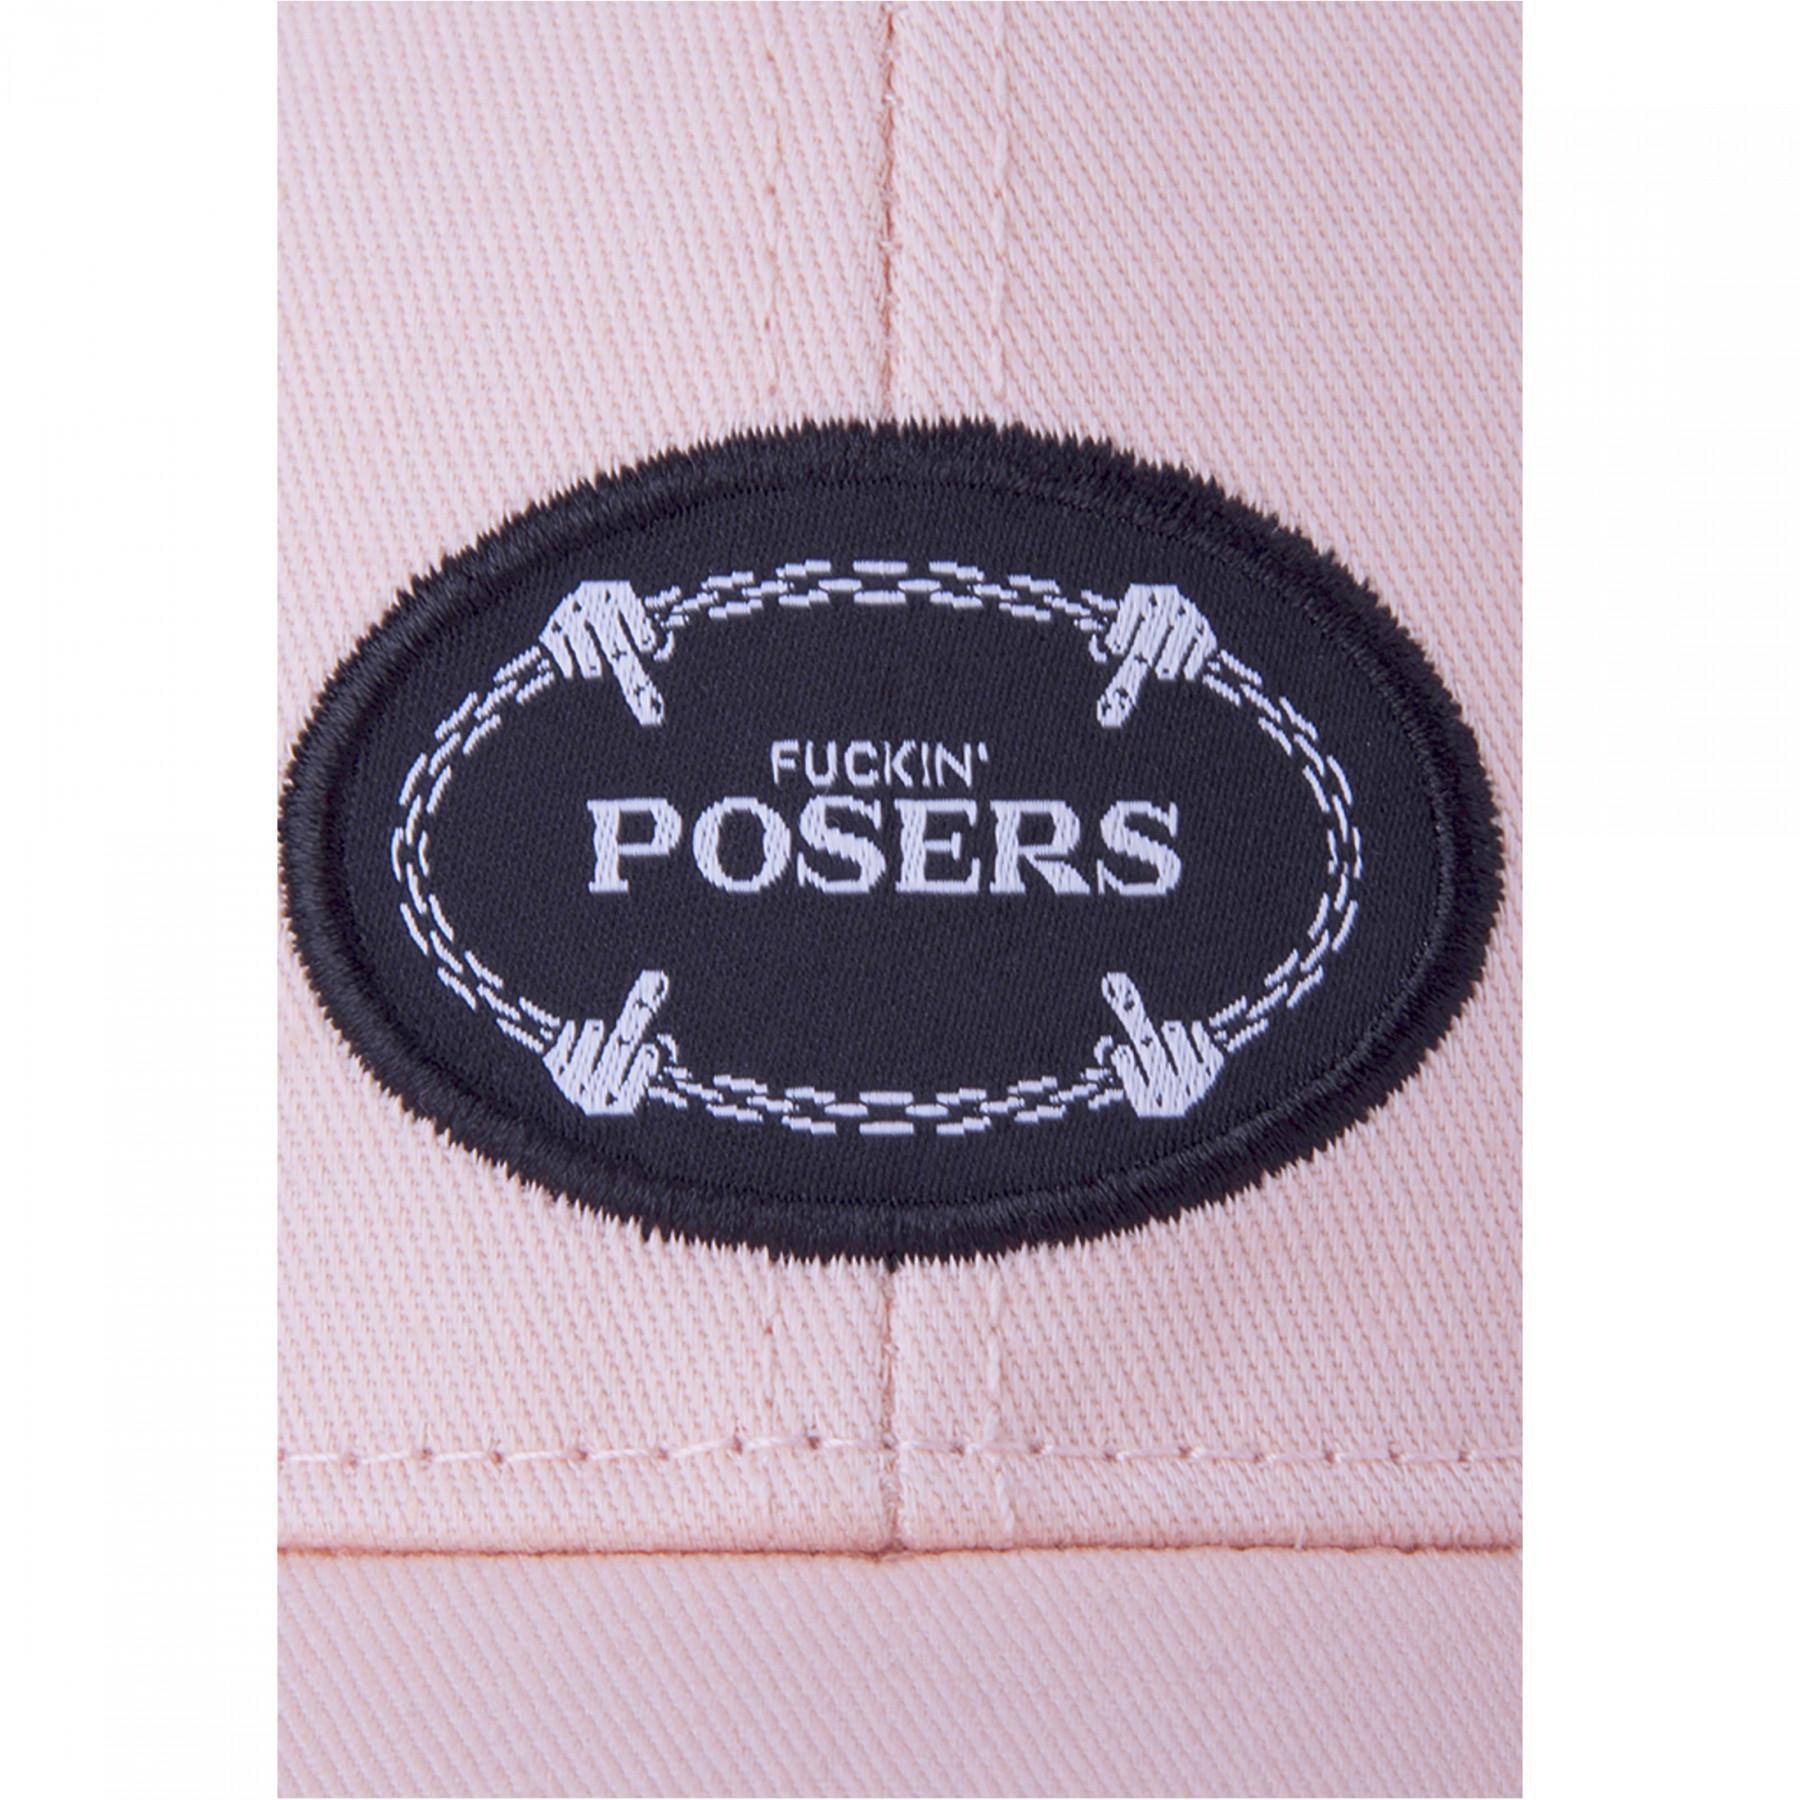 Pet Cayler & Sons wl posers curved